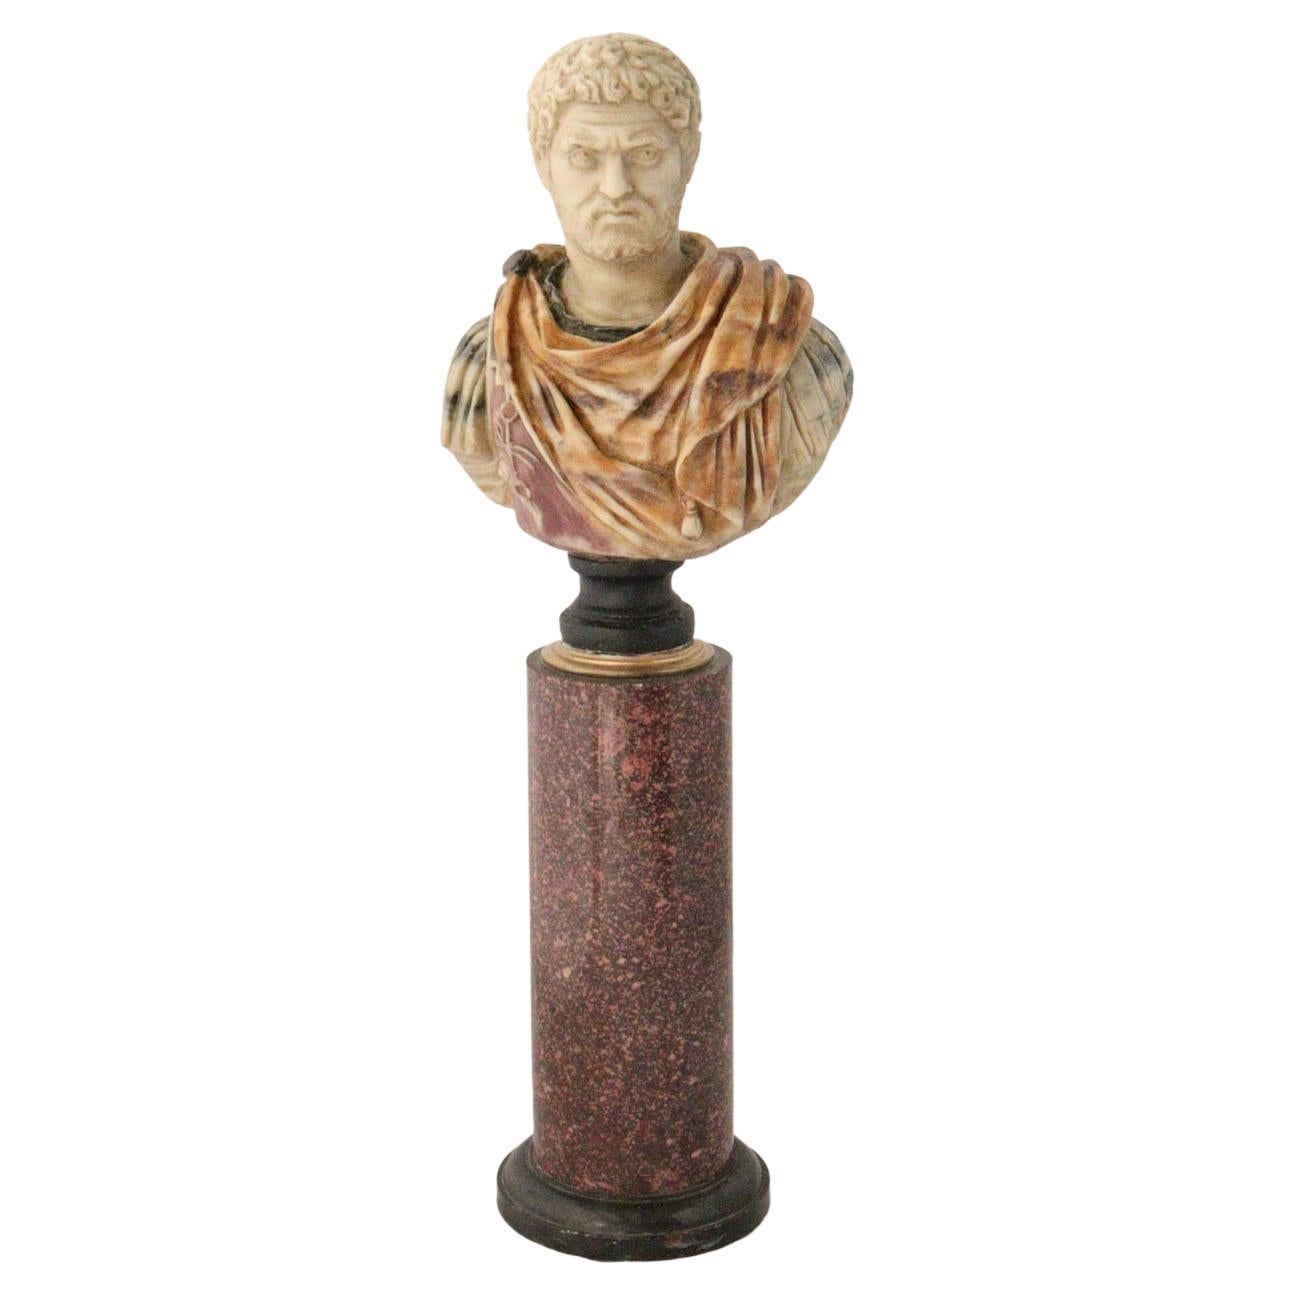 A XIXth century grand tour bust of caracalla and its porphyry column.
Bust of the Roman Emperor Caracalla in Polychromed resin simulating different colors of marbles, resting on its circular red porphyry and black marble column.
Italy
Circa